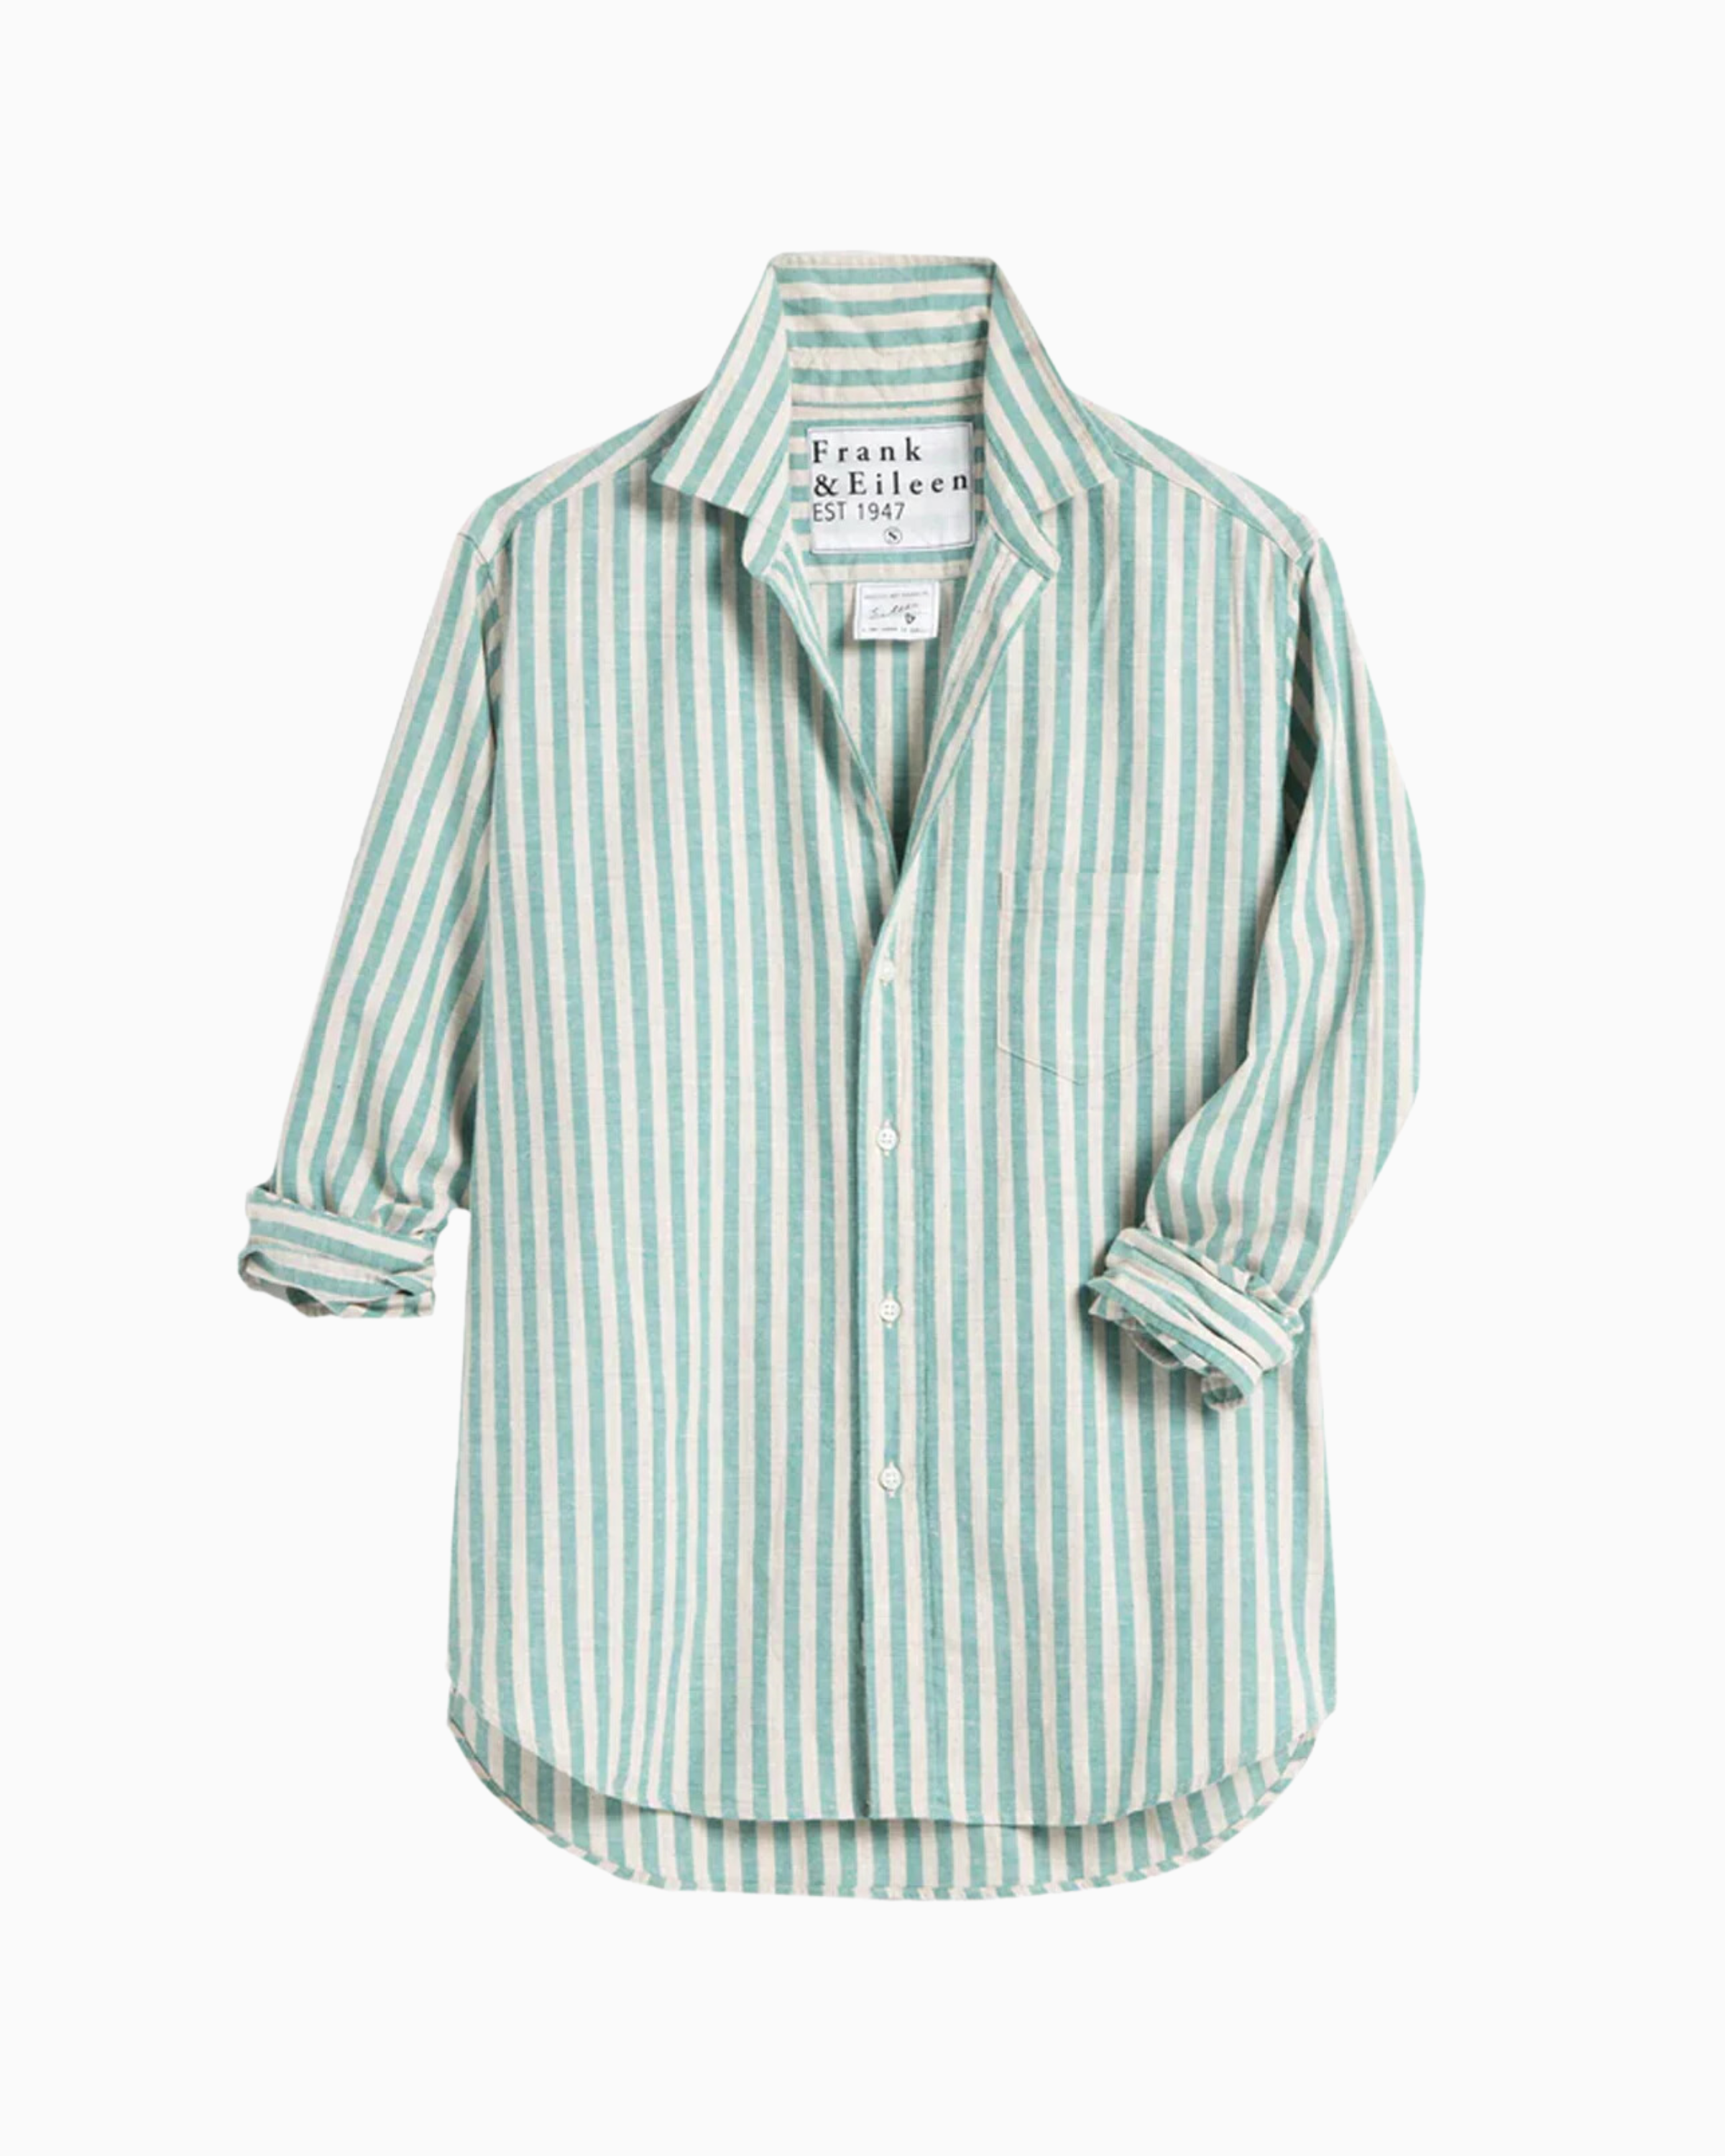 Frank & Eileen Relaxed Button Up Shirt in Green Sand Stripe